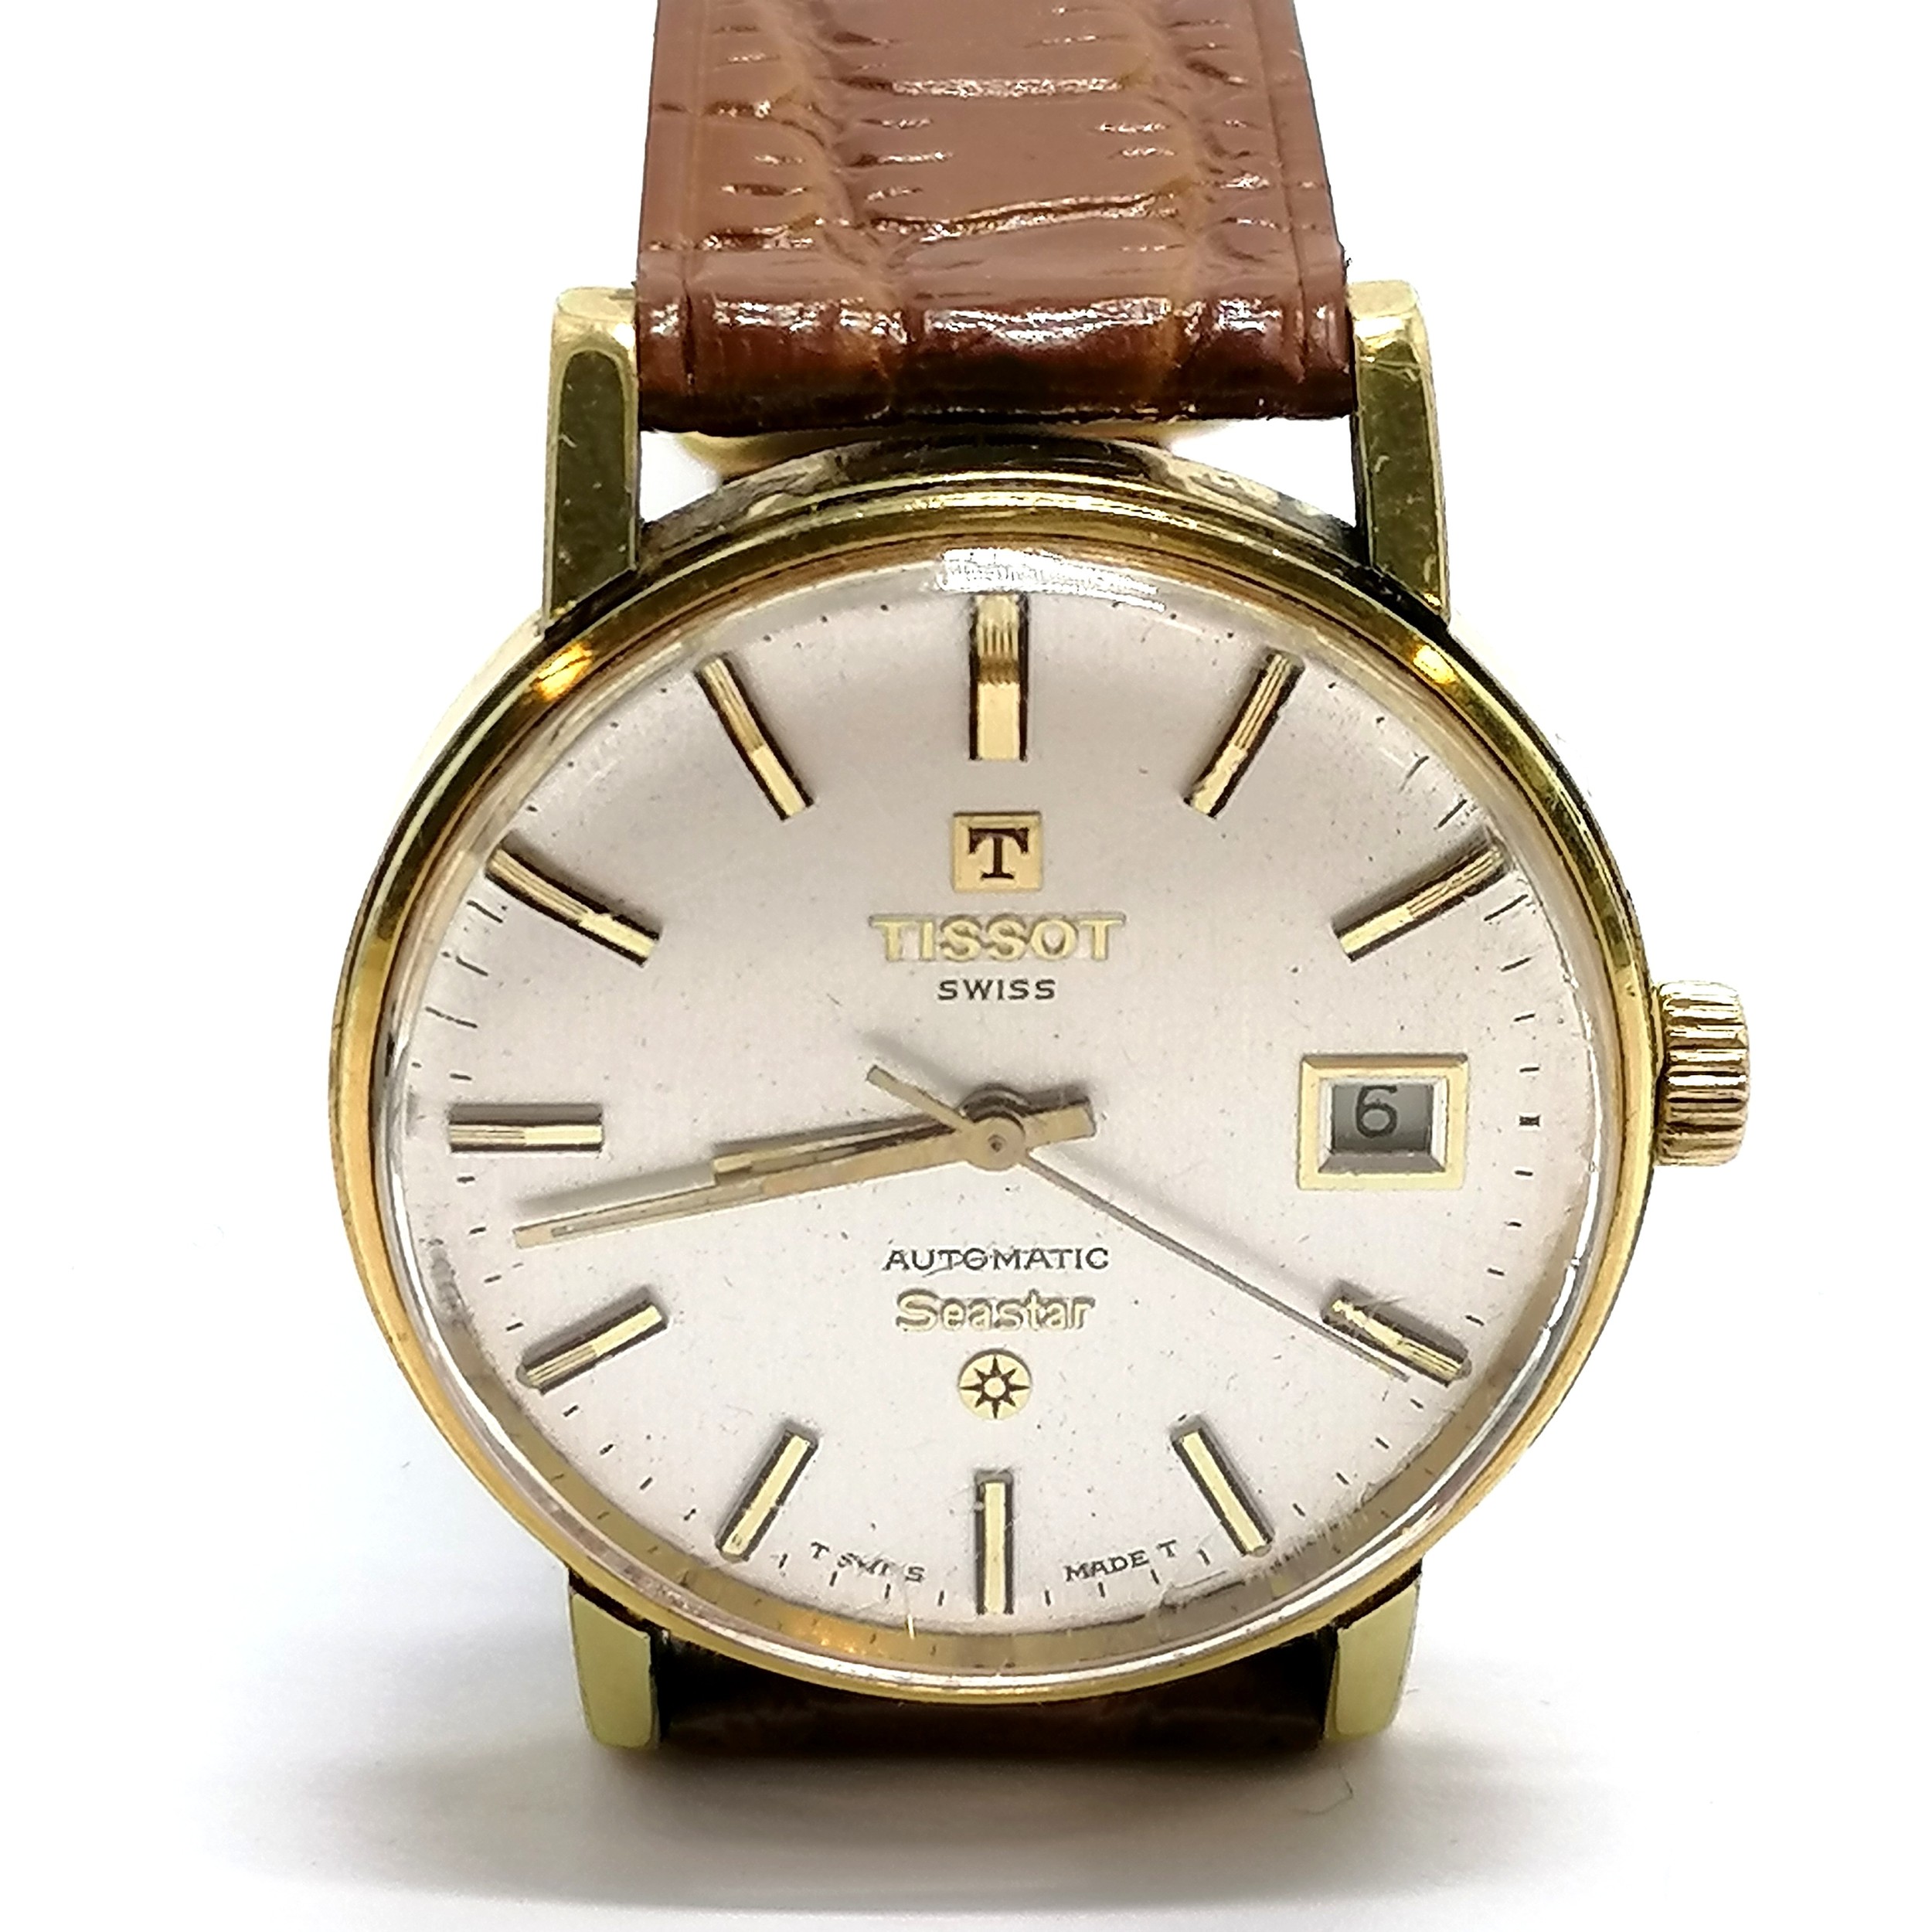 Tissot automatic seastar wristwatch gents wristwatch - 32mm case and has a gold plated head with a